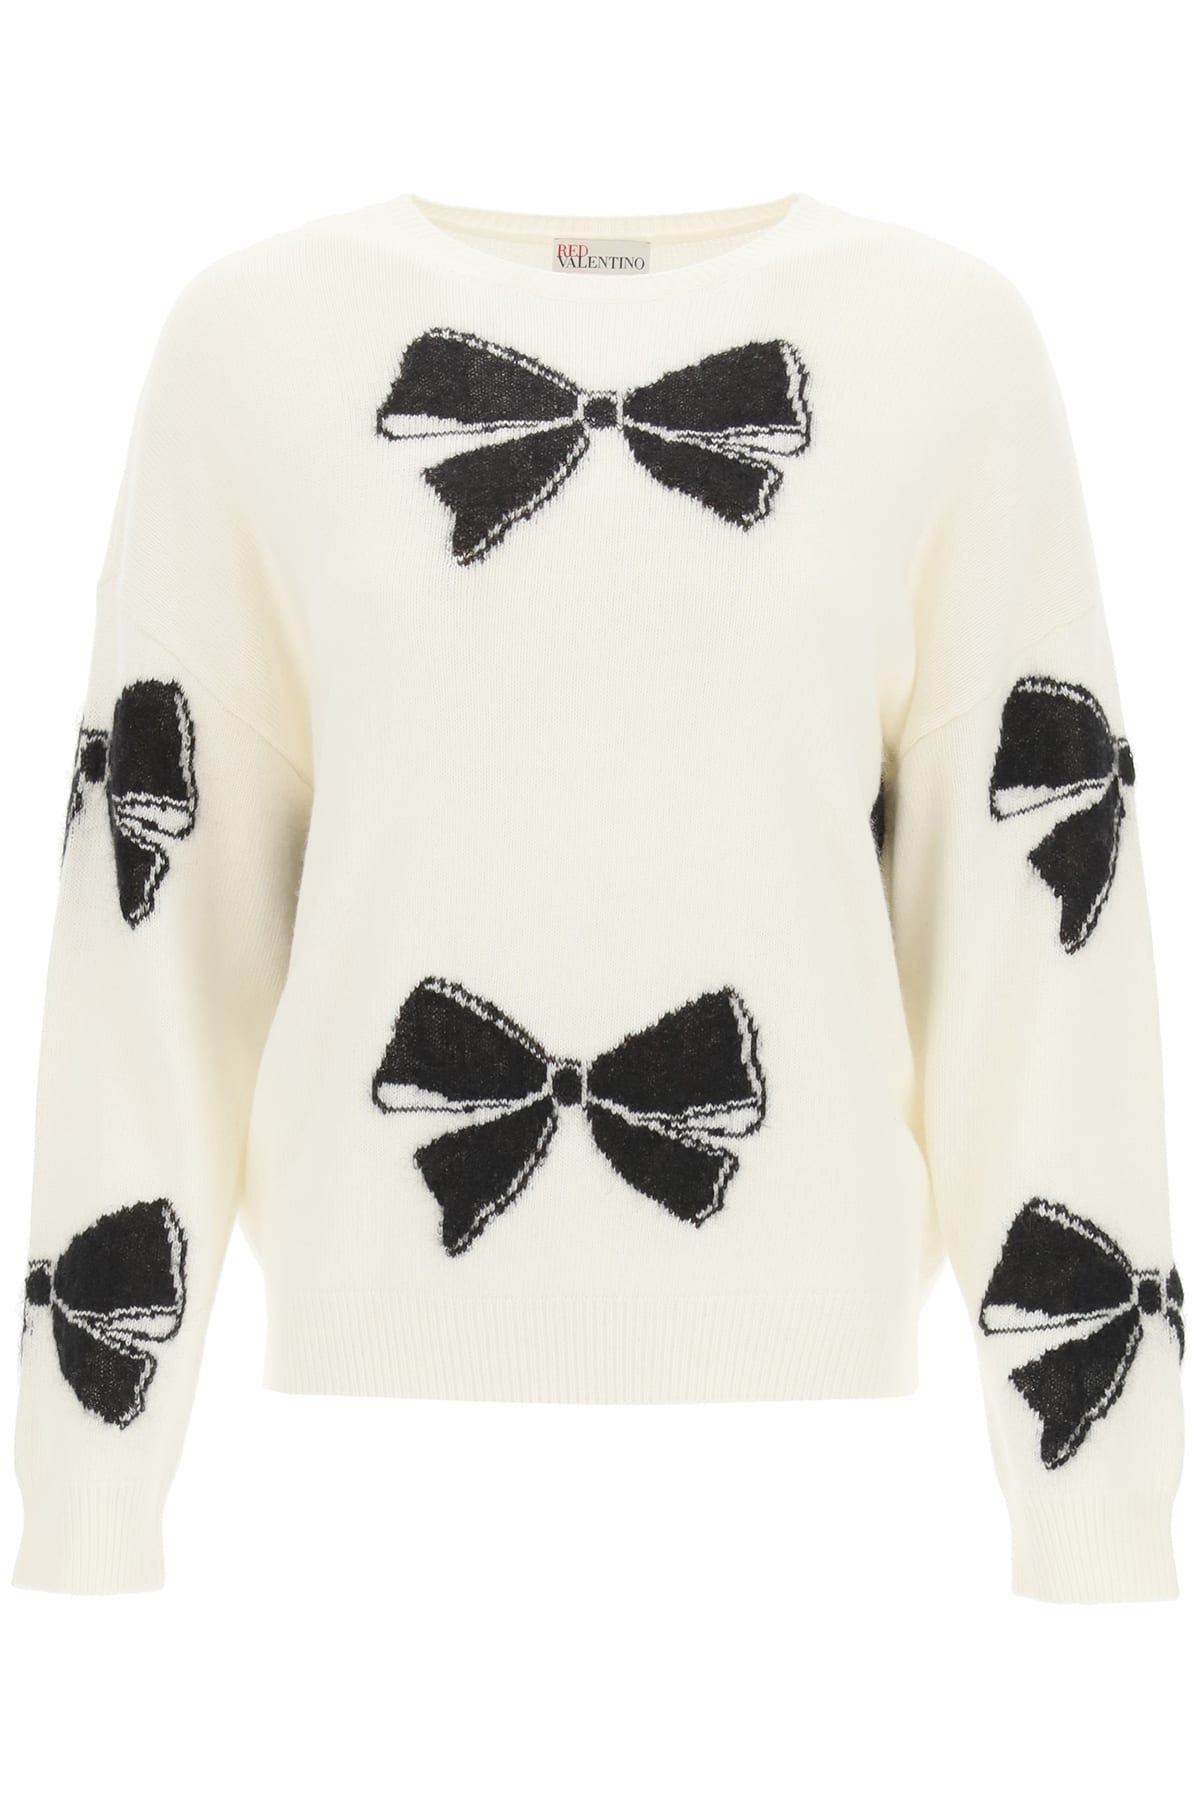 RED Valentino Sweater With Bow Motif